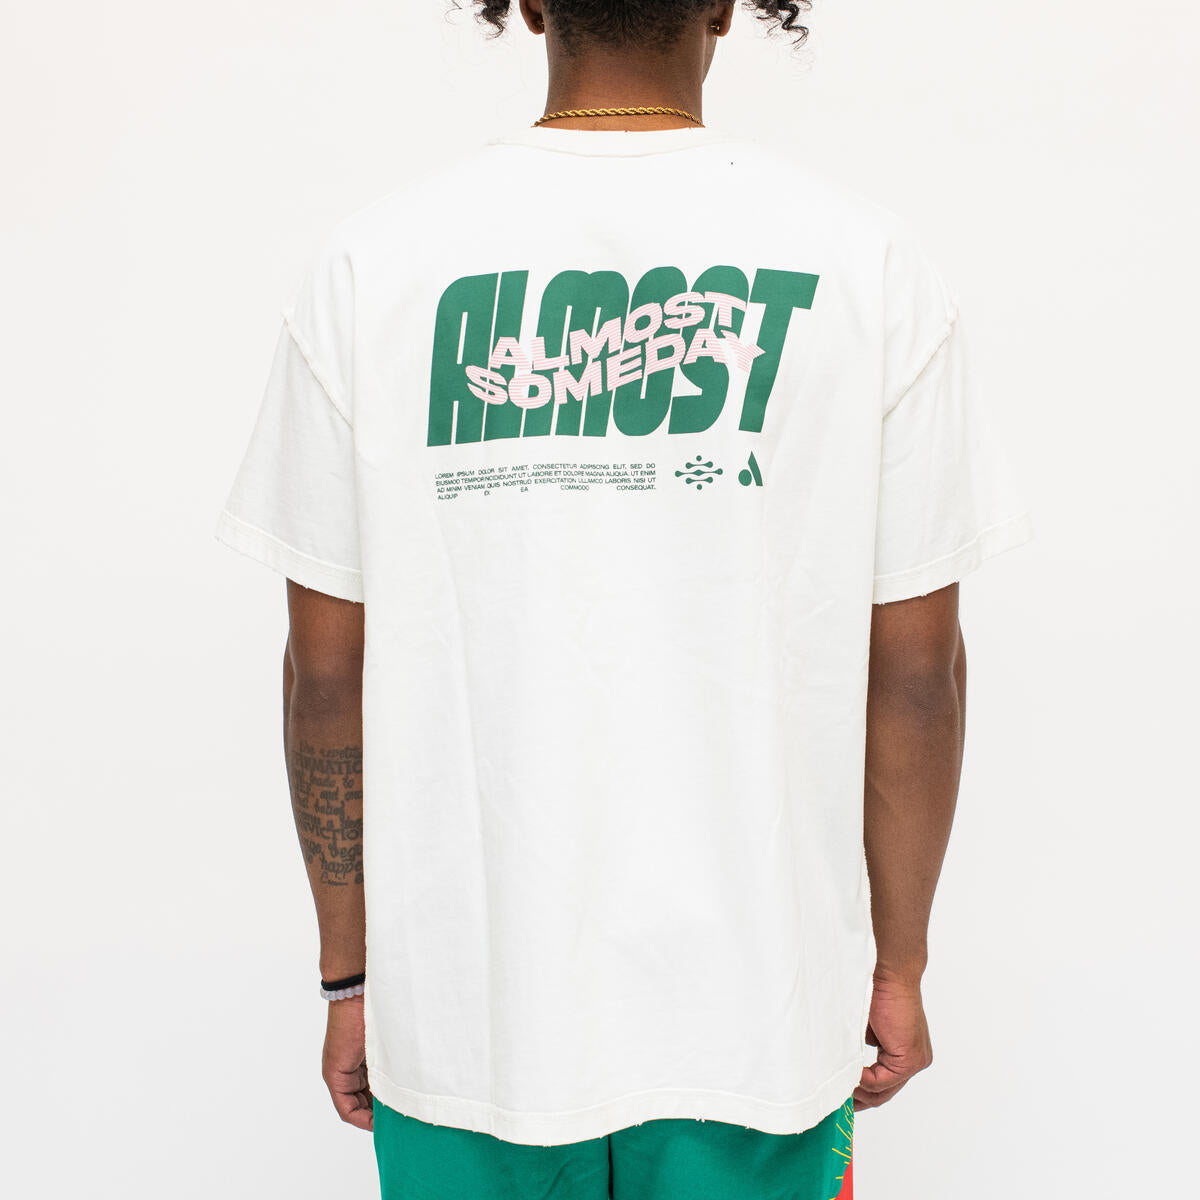 Almost Someday "Warp Tee" (White/Green)